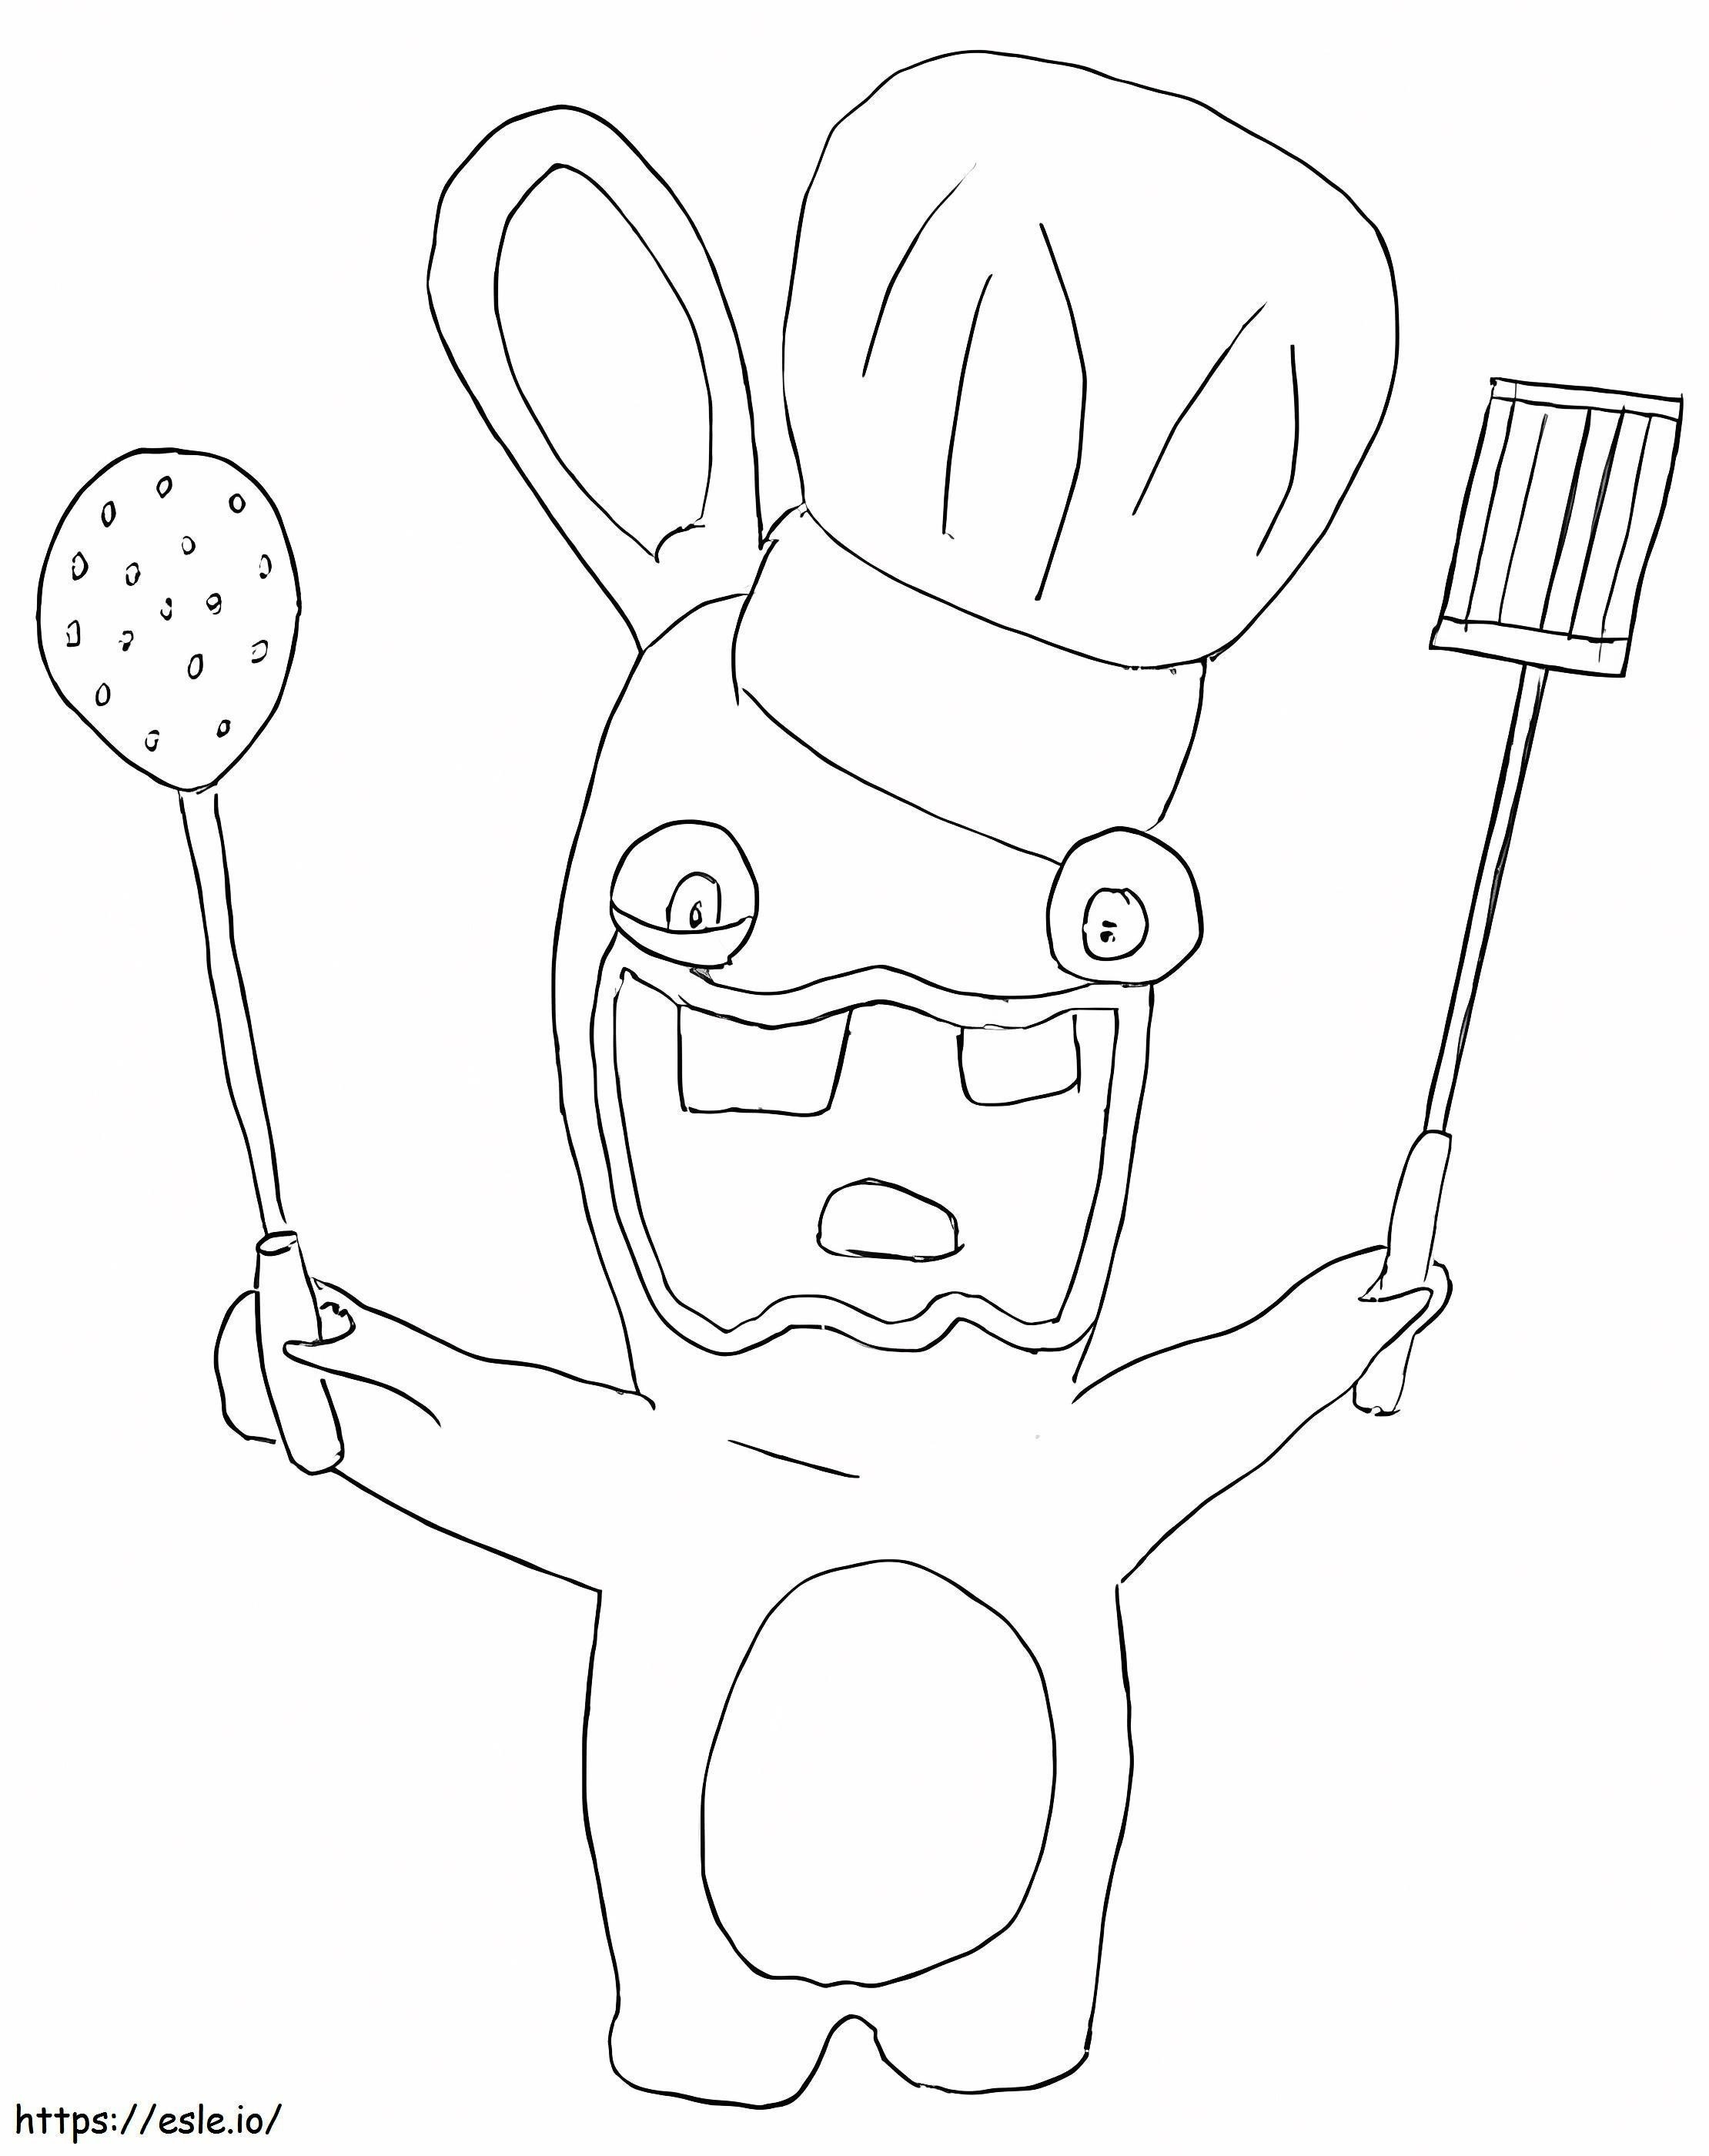 Chef Raving Rabbids coloring page